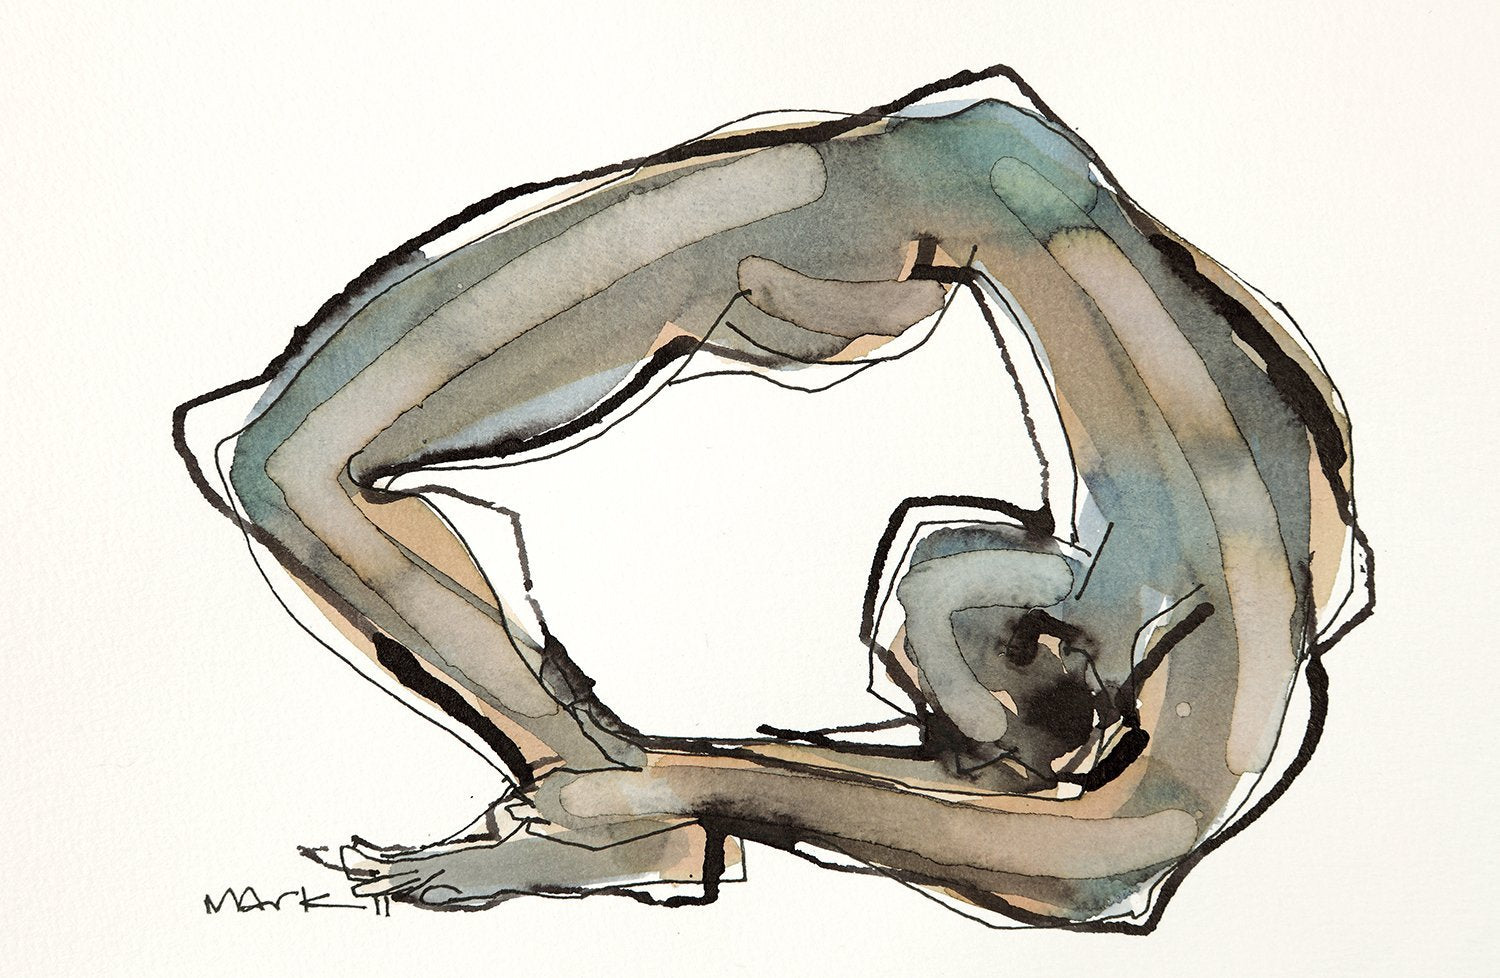 Yoga 44|S. Mark Rathinaraj- Pen and Ink on Paper, , 5.5 x 8.5 inches